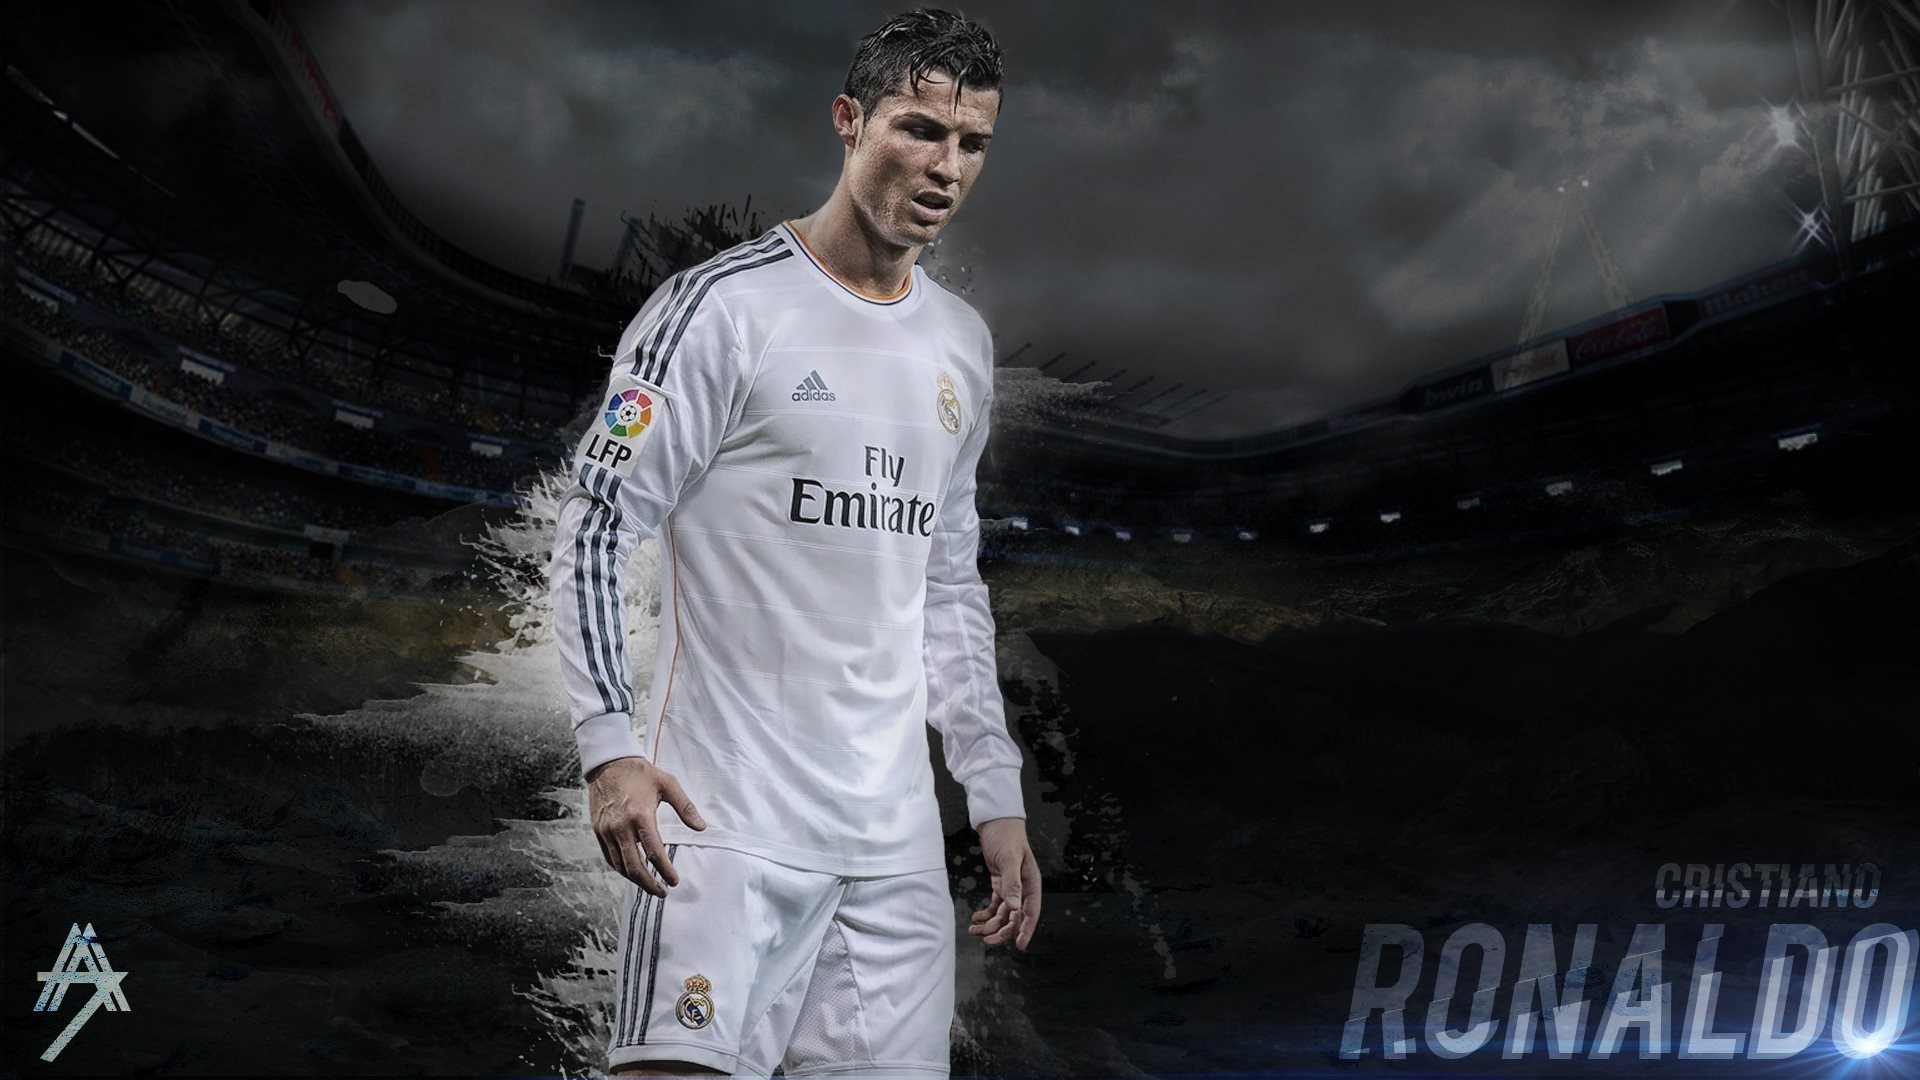 Cristiano ronaldo wallpaper 2017 hd – photo . Watch32 Watch Movies Online Free in HD at Watch32comm